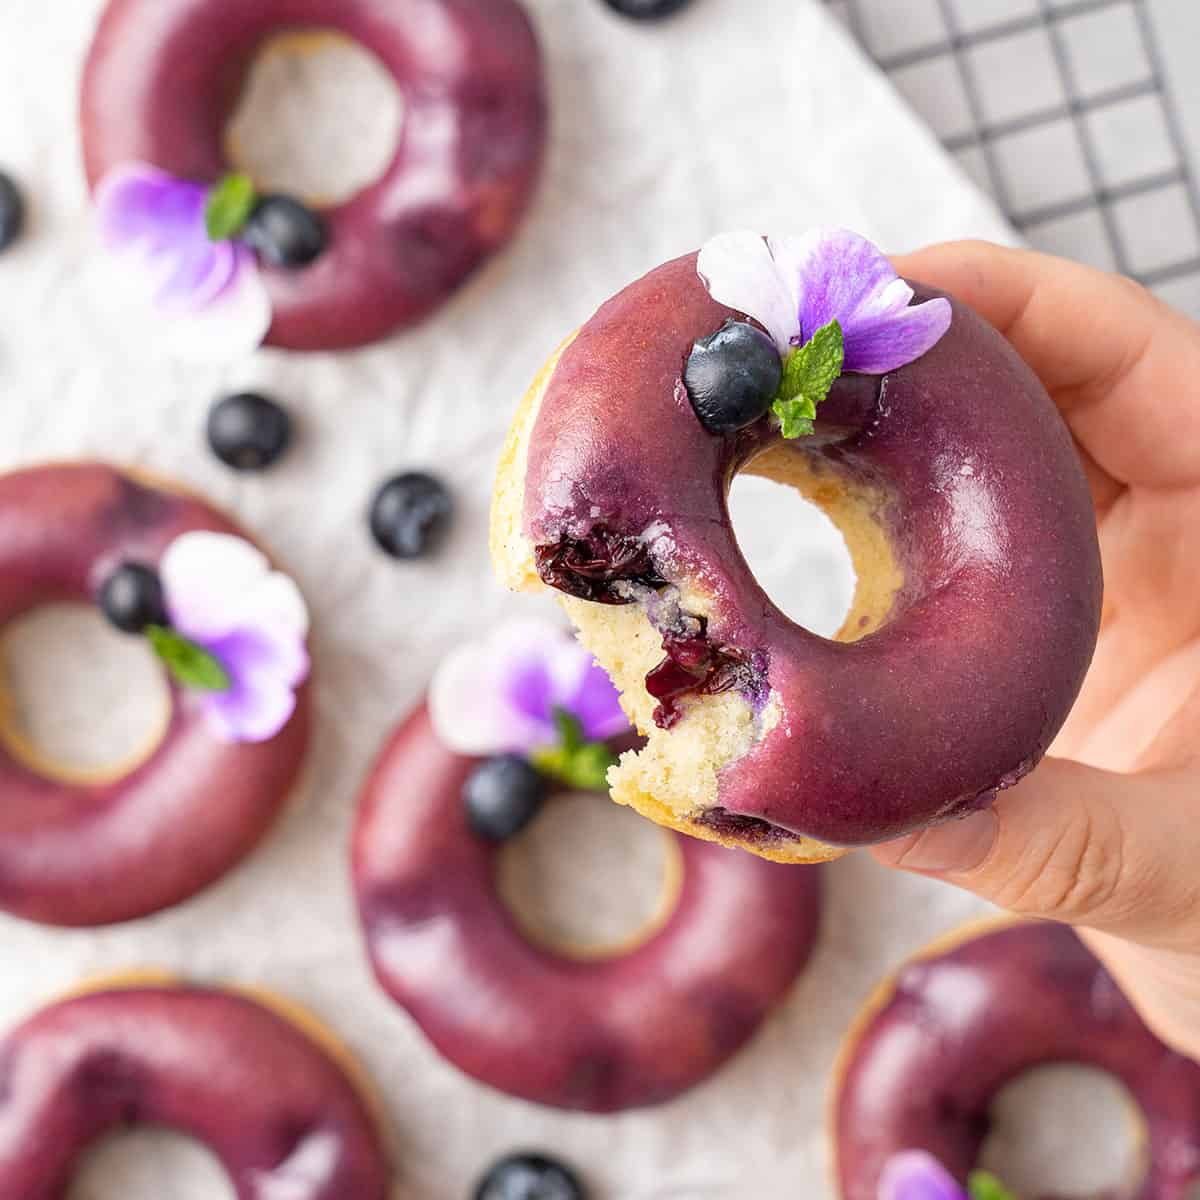 Blueberry baked donuts on a cooling rack and a hand holding one of the donut.